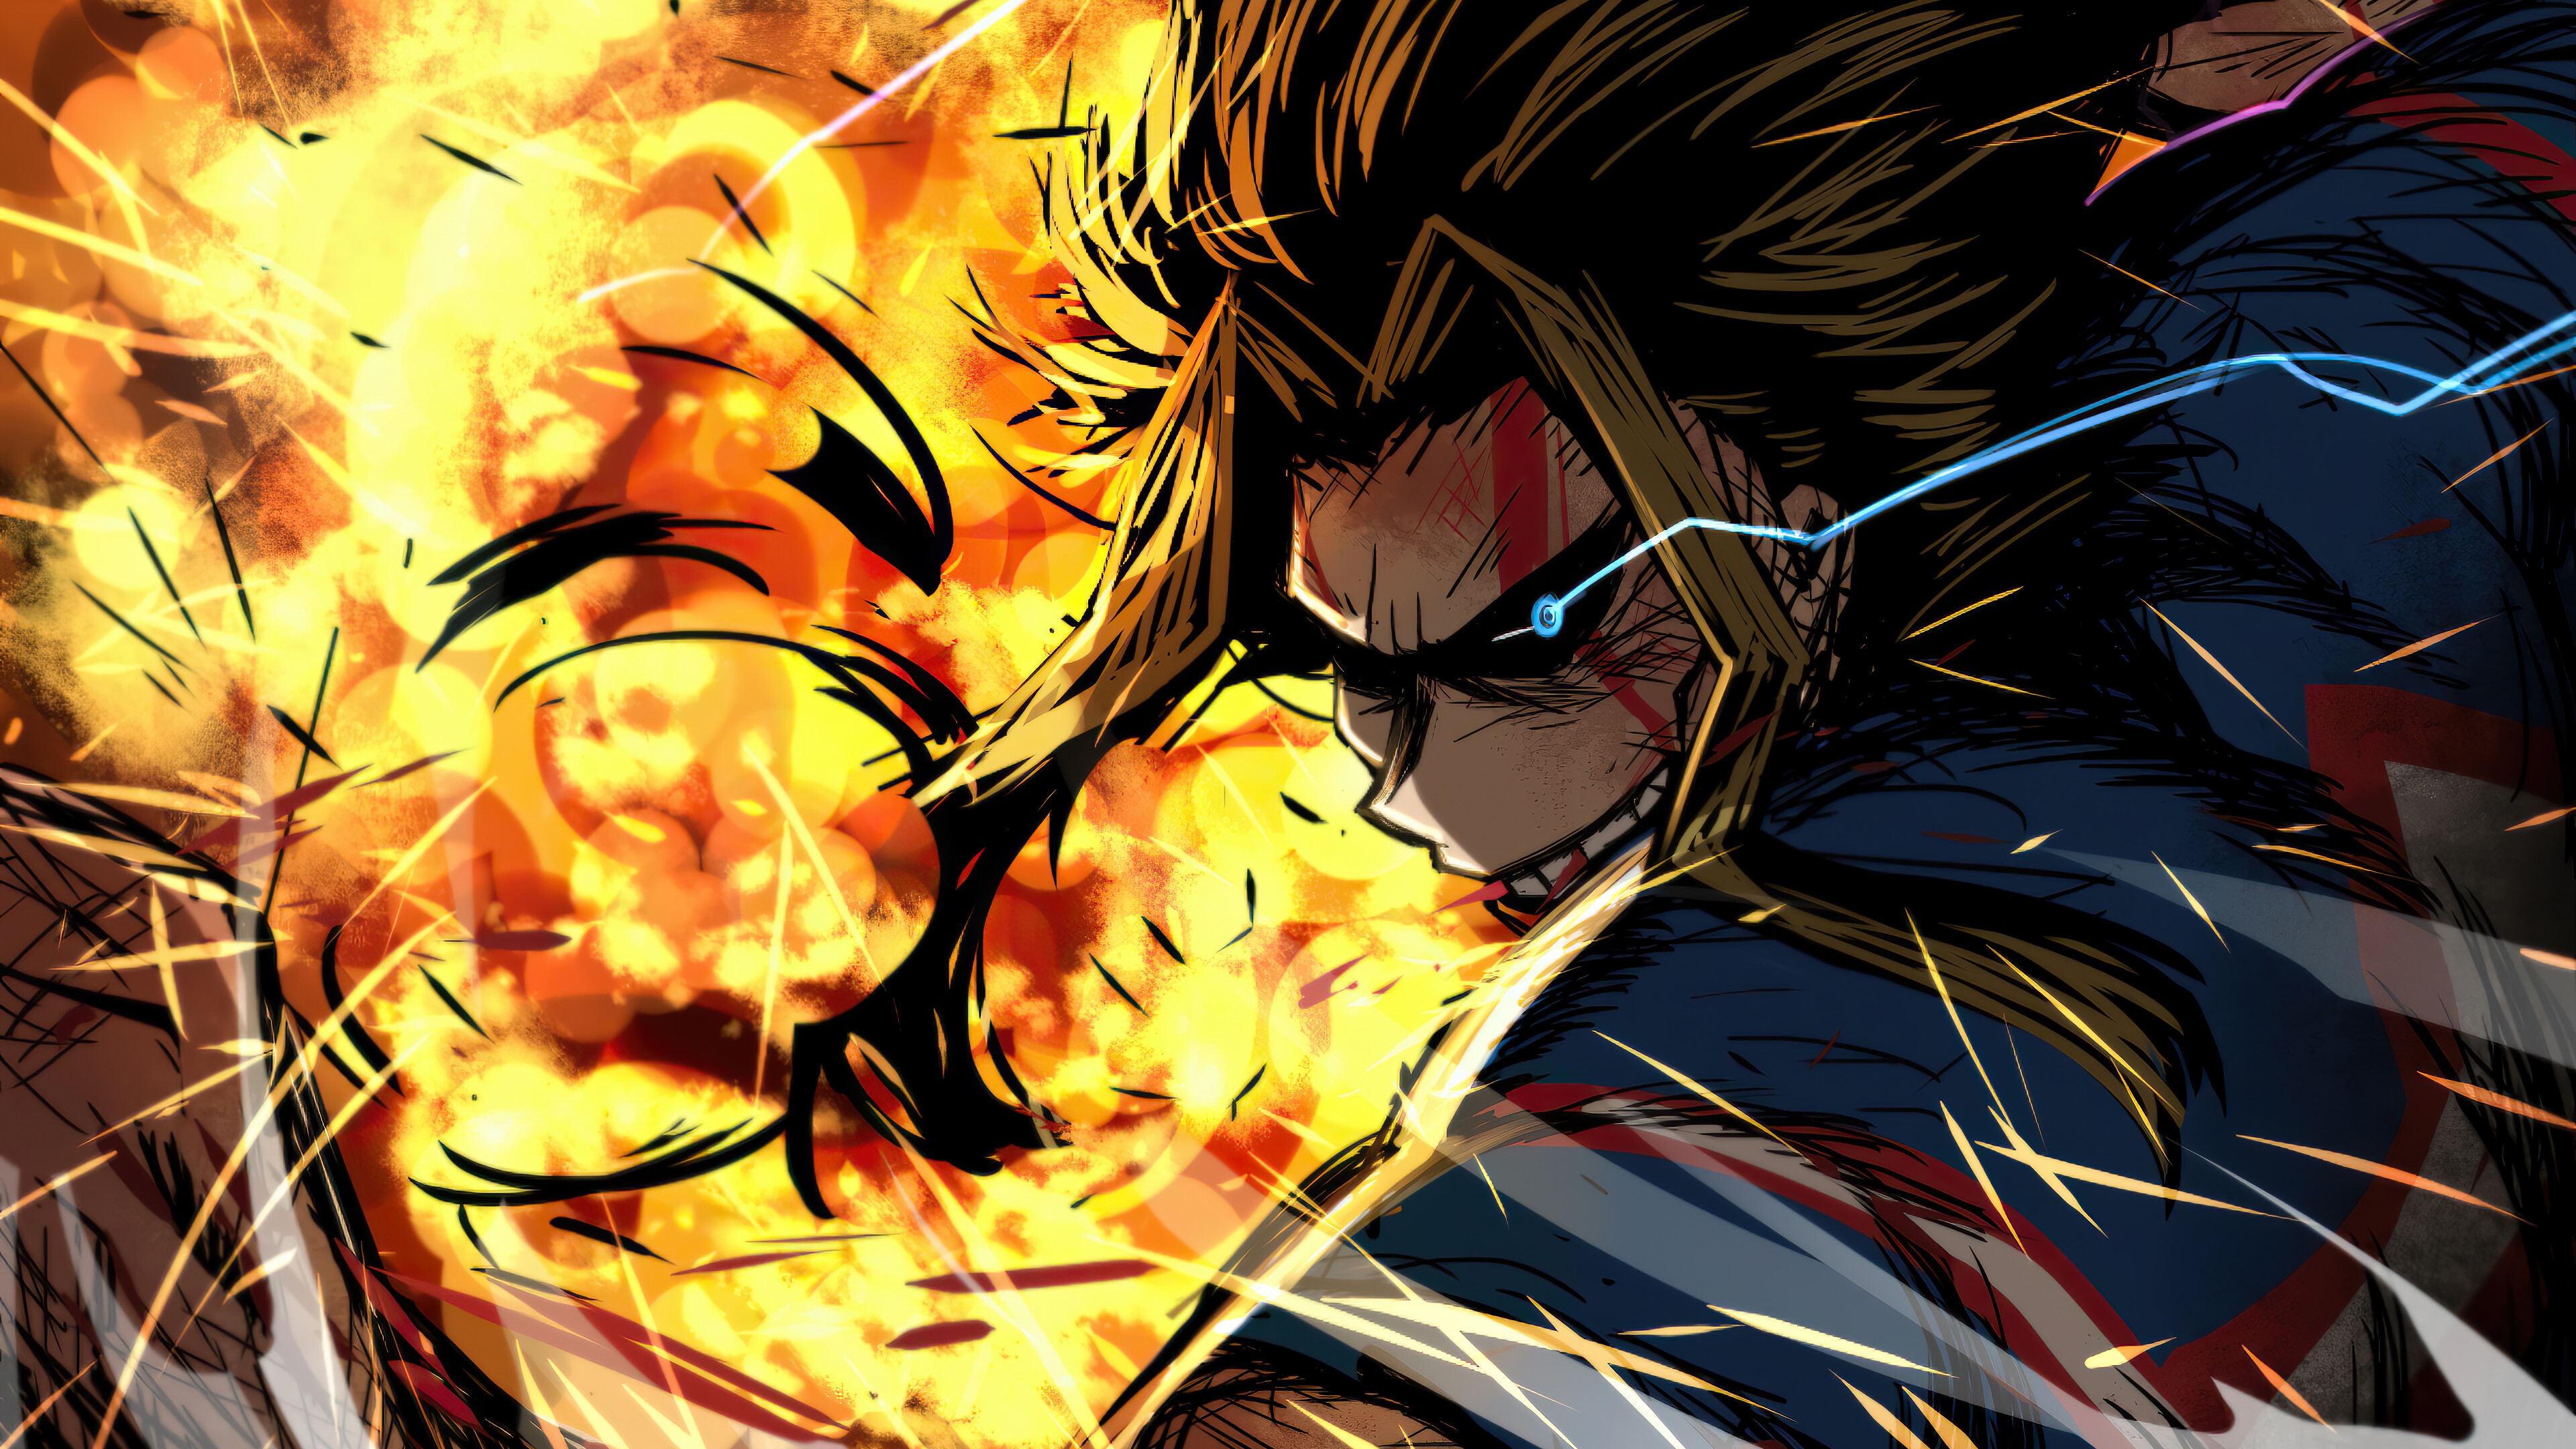 All Might 1080P, 2k, 4k HD wallpaper, background free download